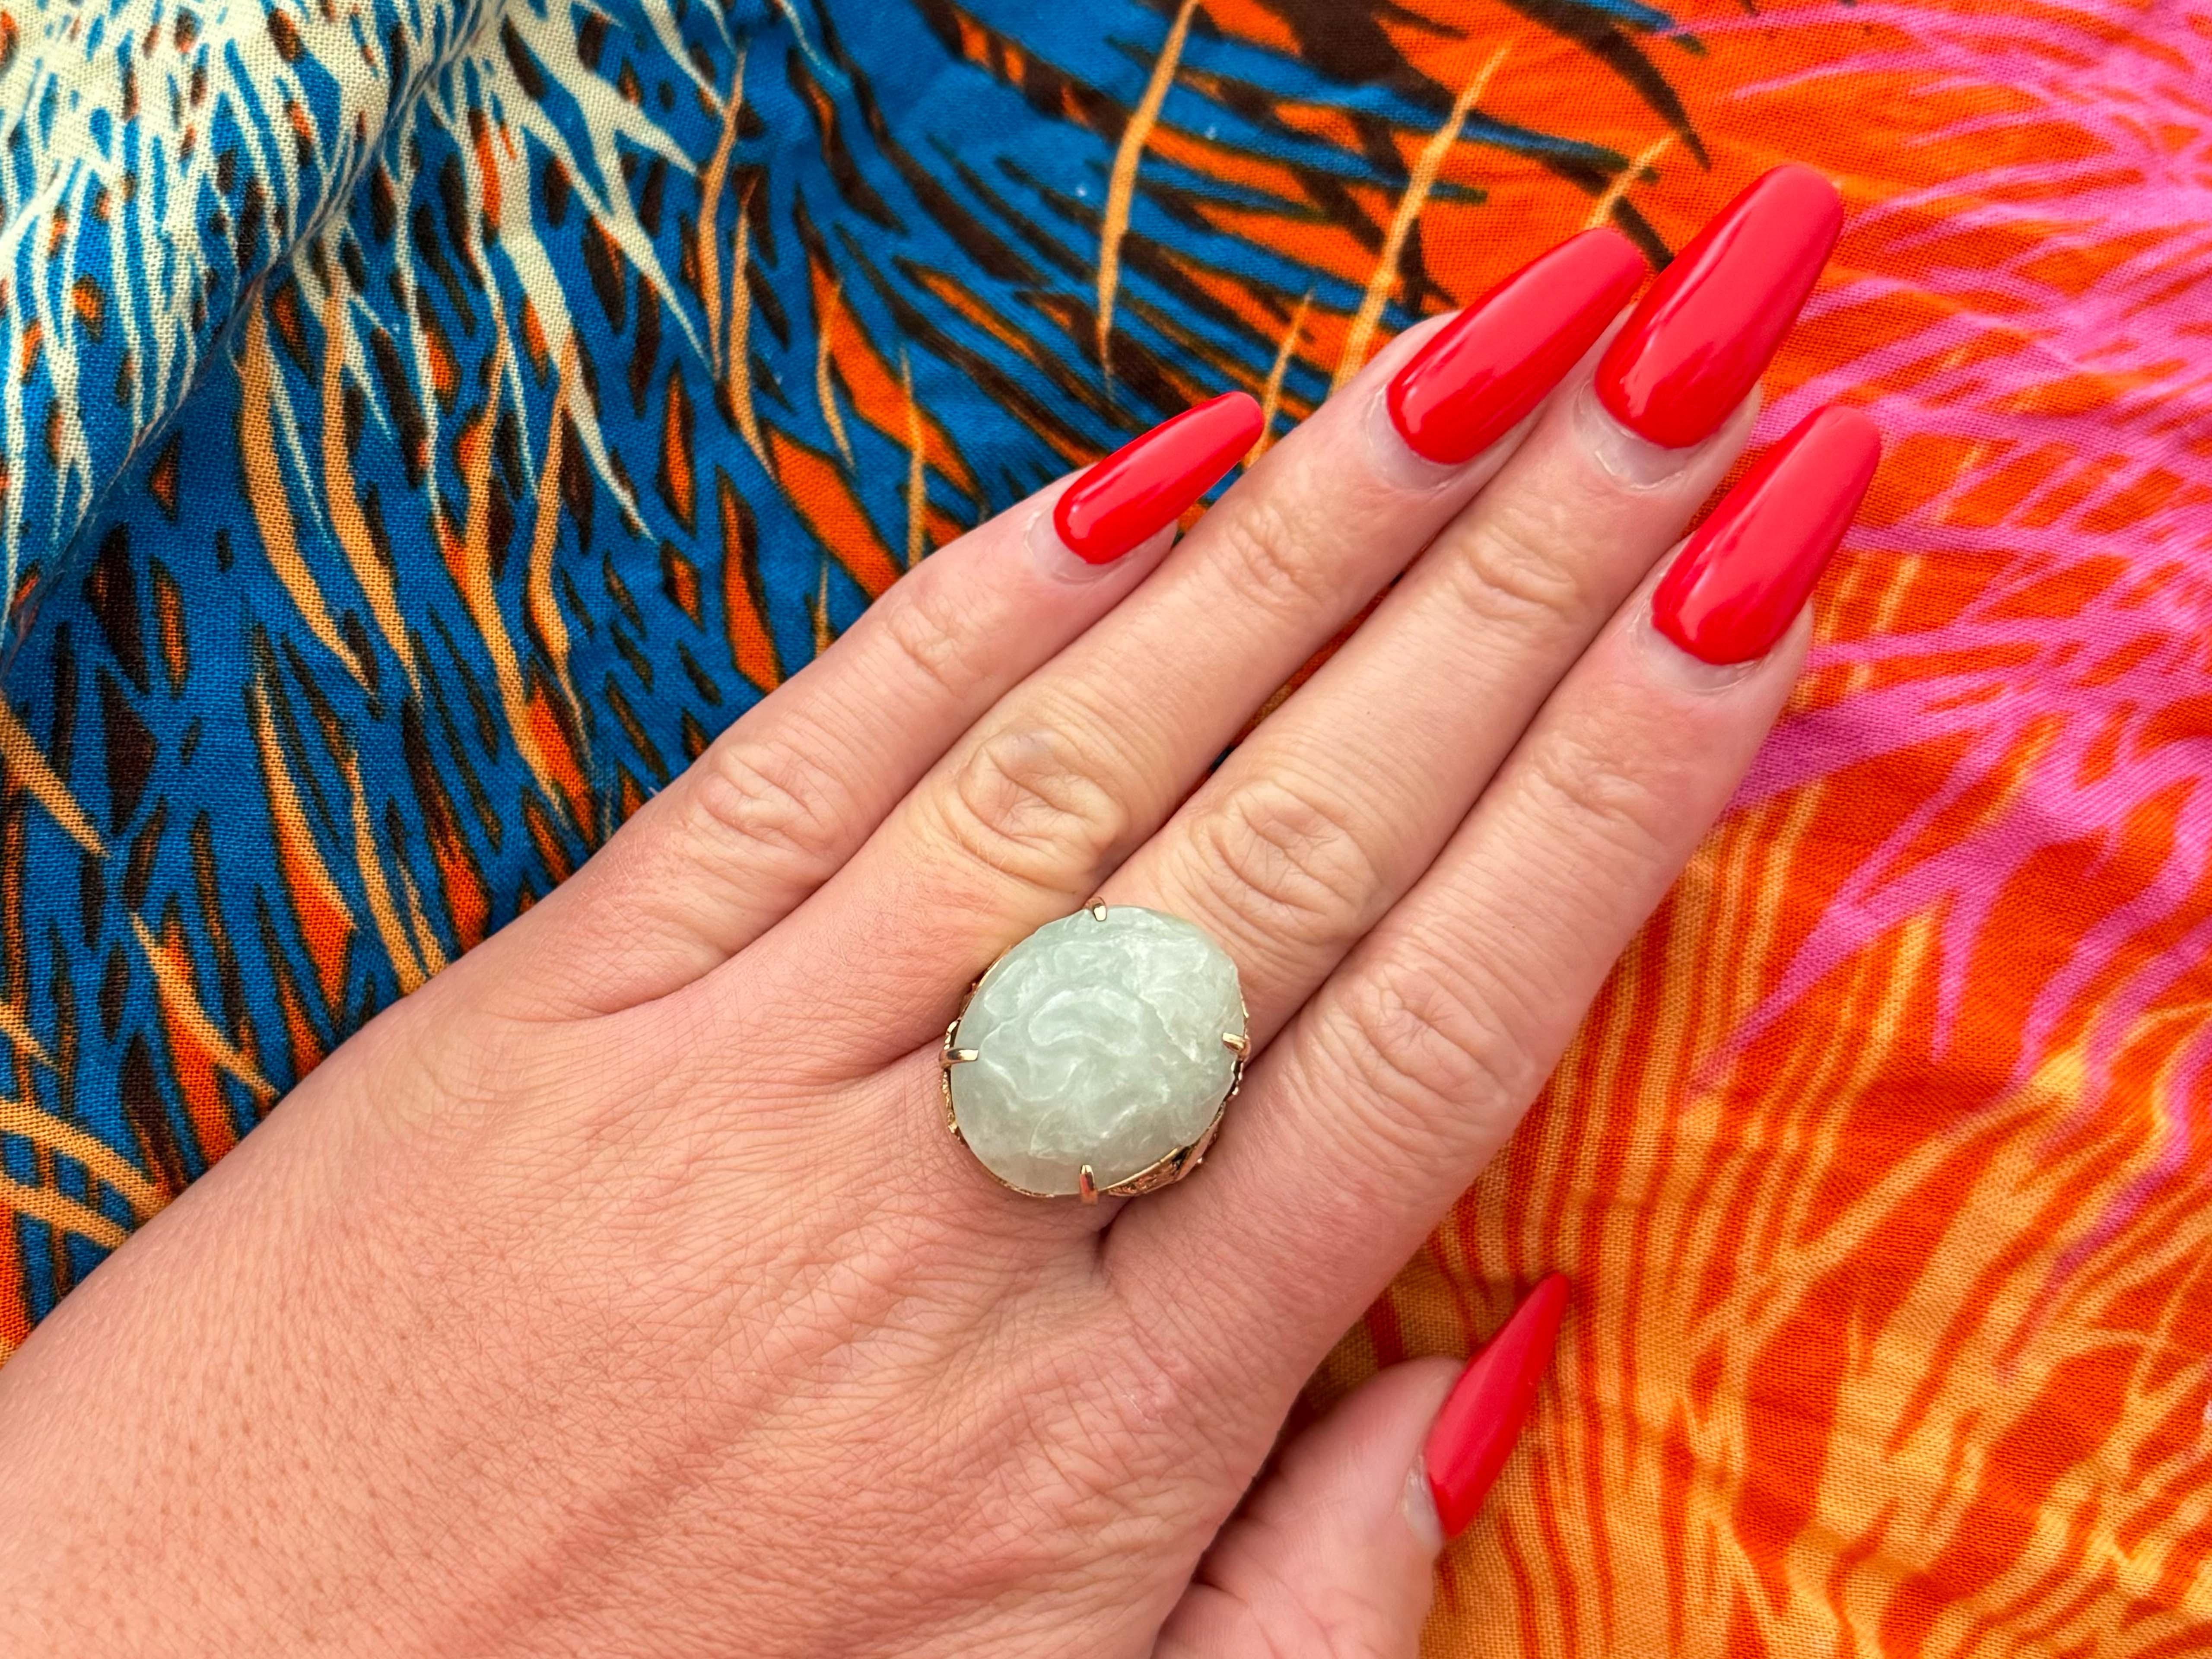 Item Specifications:

Metal: 14k Yellow Gold 

Style: Statement Ring

Ring Size: 8 (resizing available for a fee)

Total Weight: 12.7 Grams

Gemstone Specifications:
​
​Center Gemstone: Nephrite Jade

Shape: Oval

Cut: Carved

Jade Measurements: